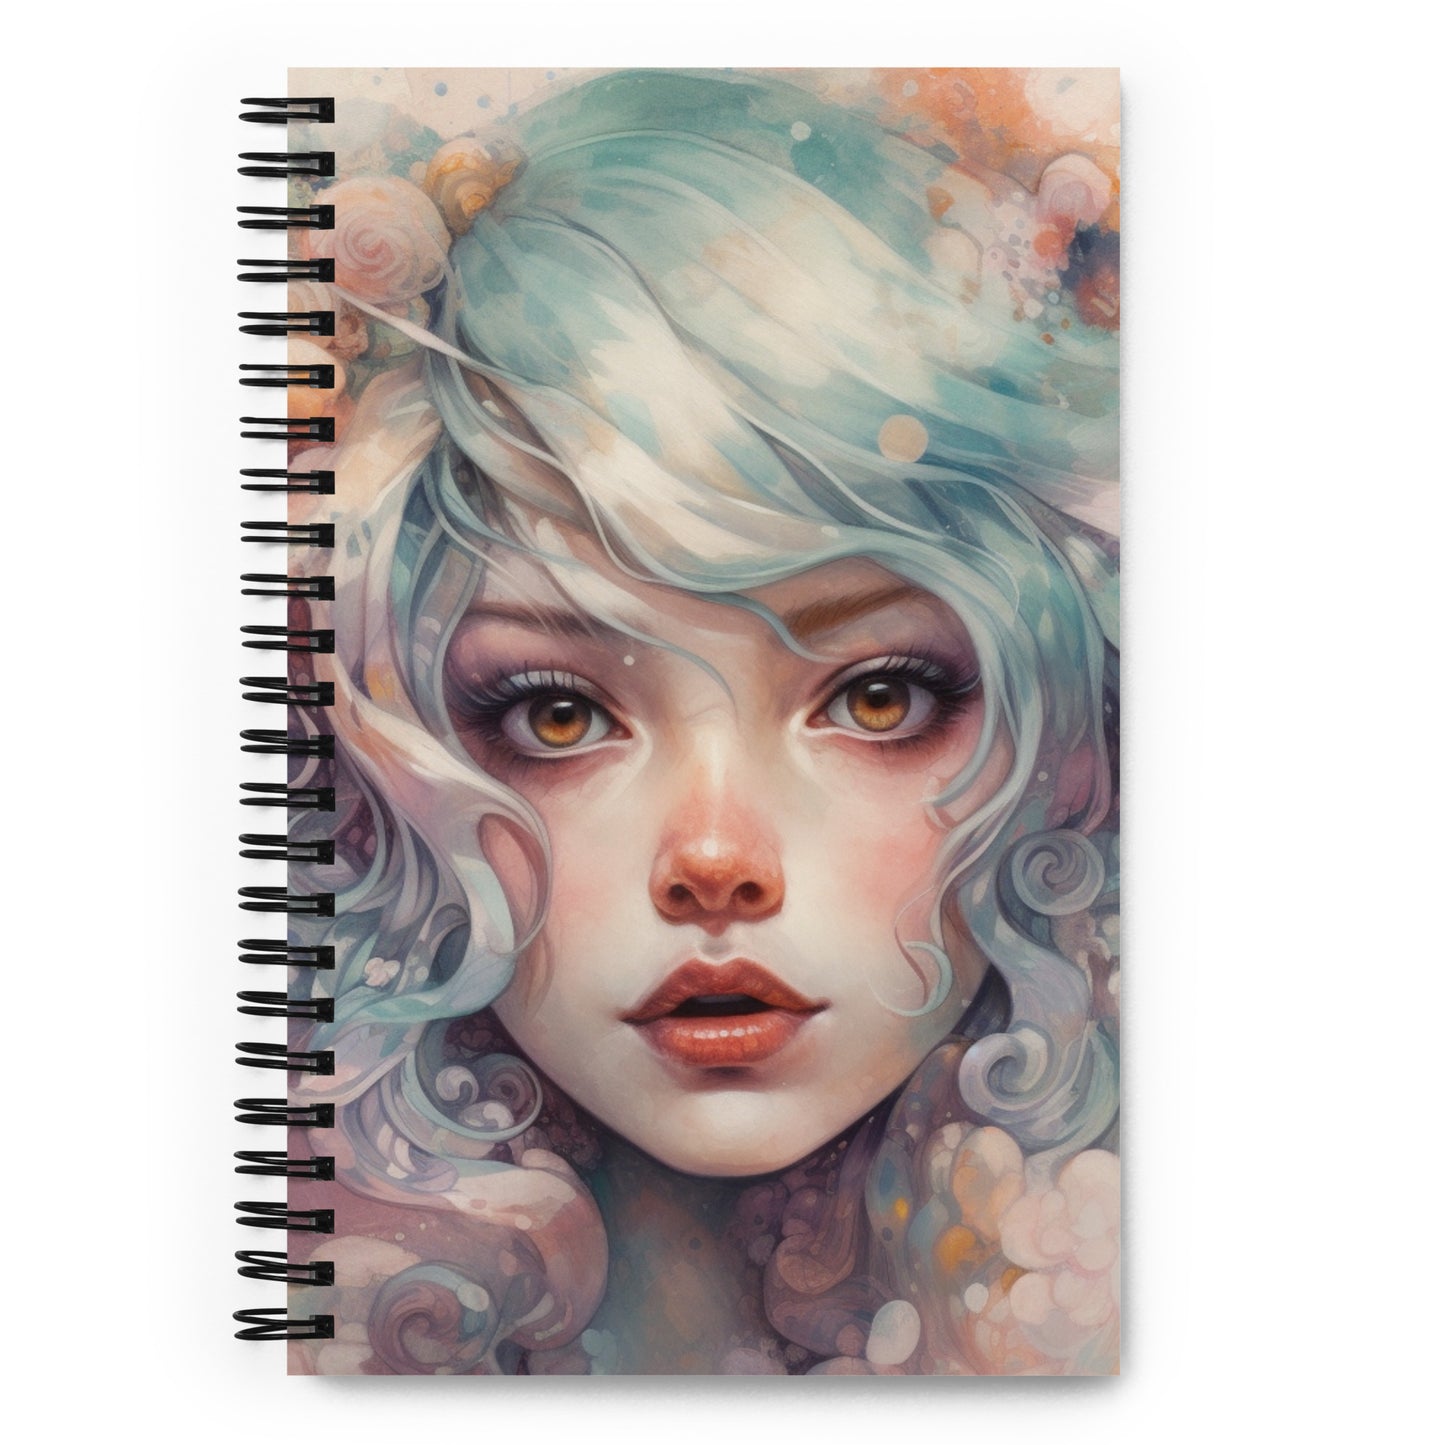 PASTEL GIRL SPIRAL DOTTED NOTEBOOK SERIES